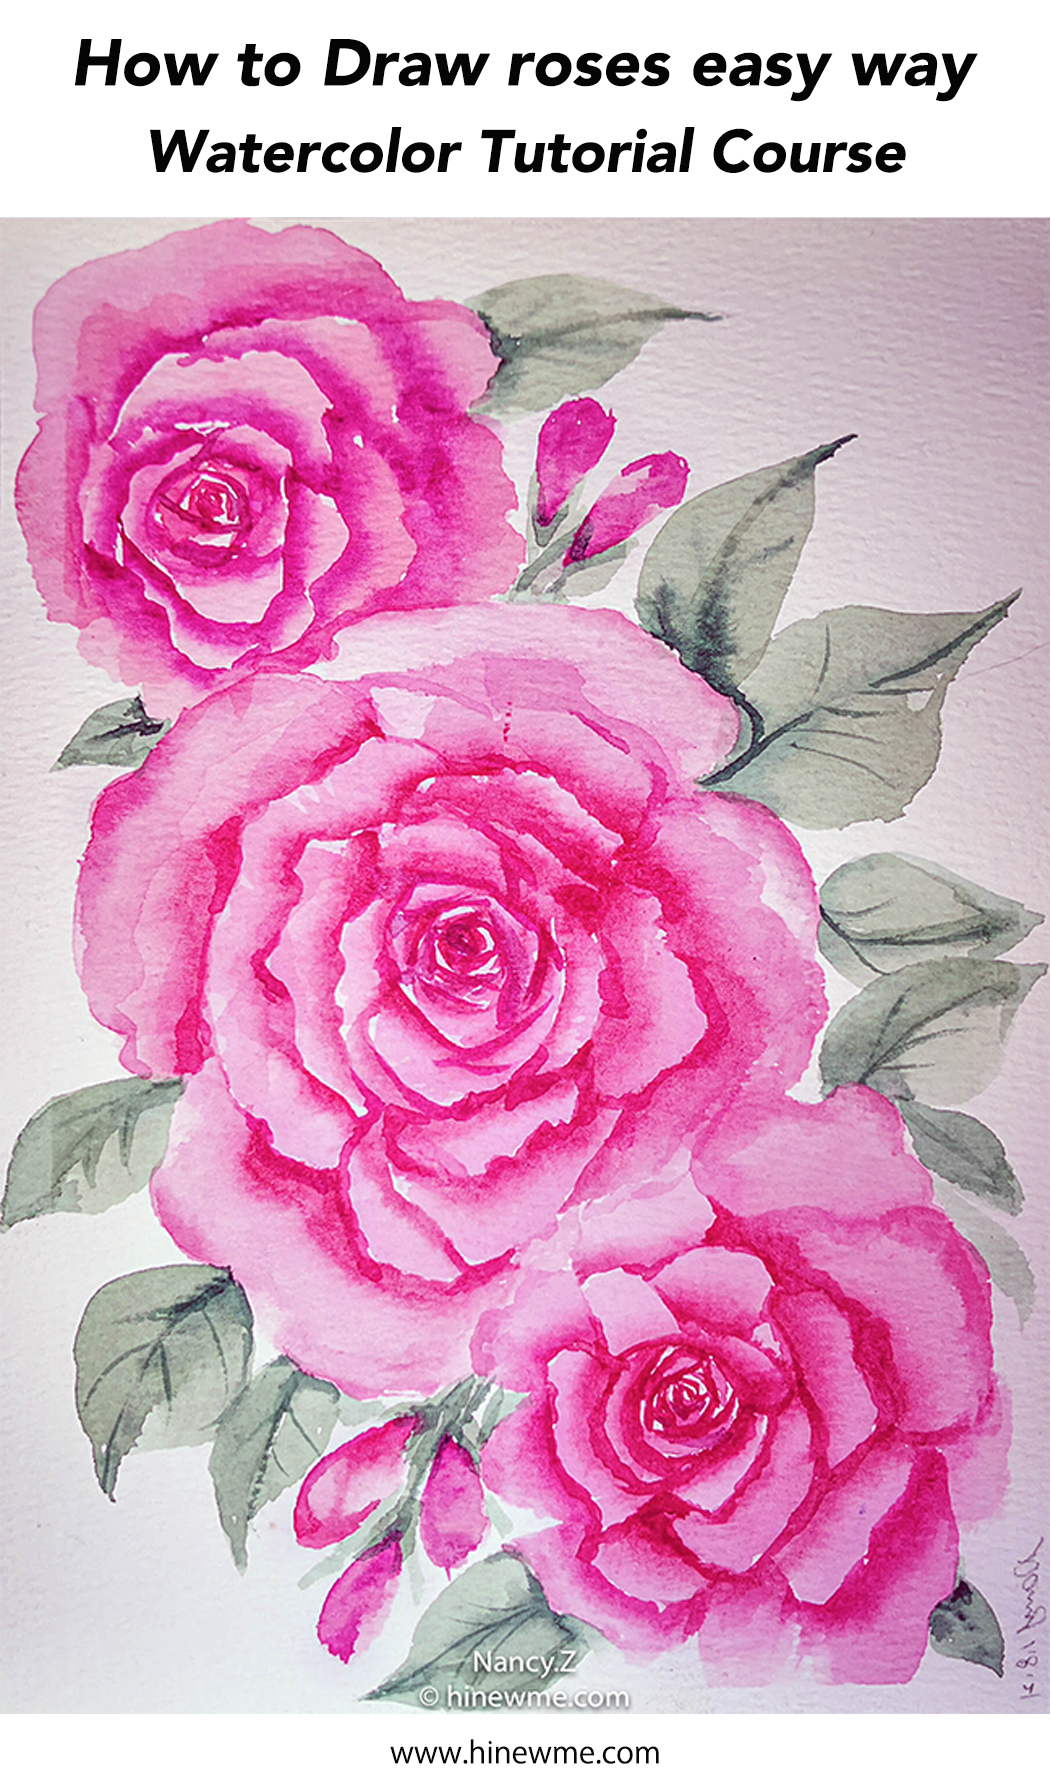 Watercolor peony flowers tutorial step by step easy for a beginner, come to see my web online class